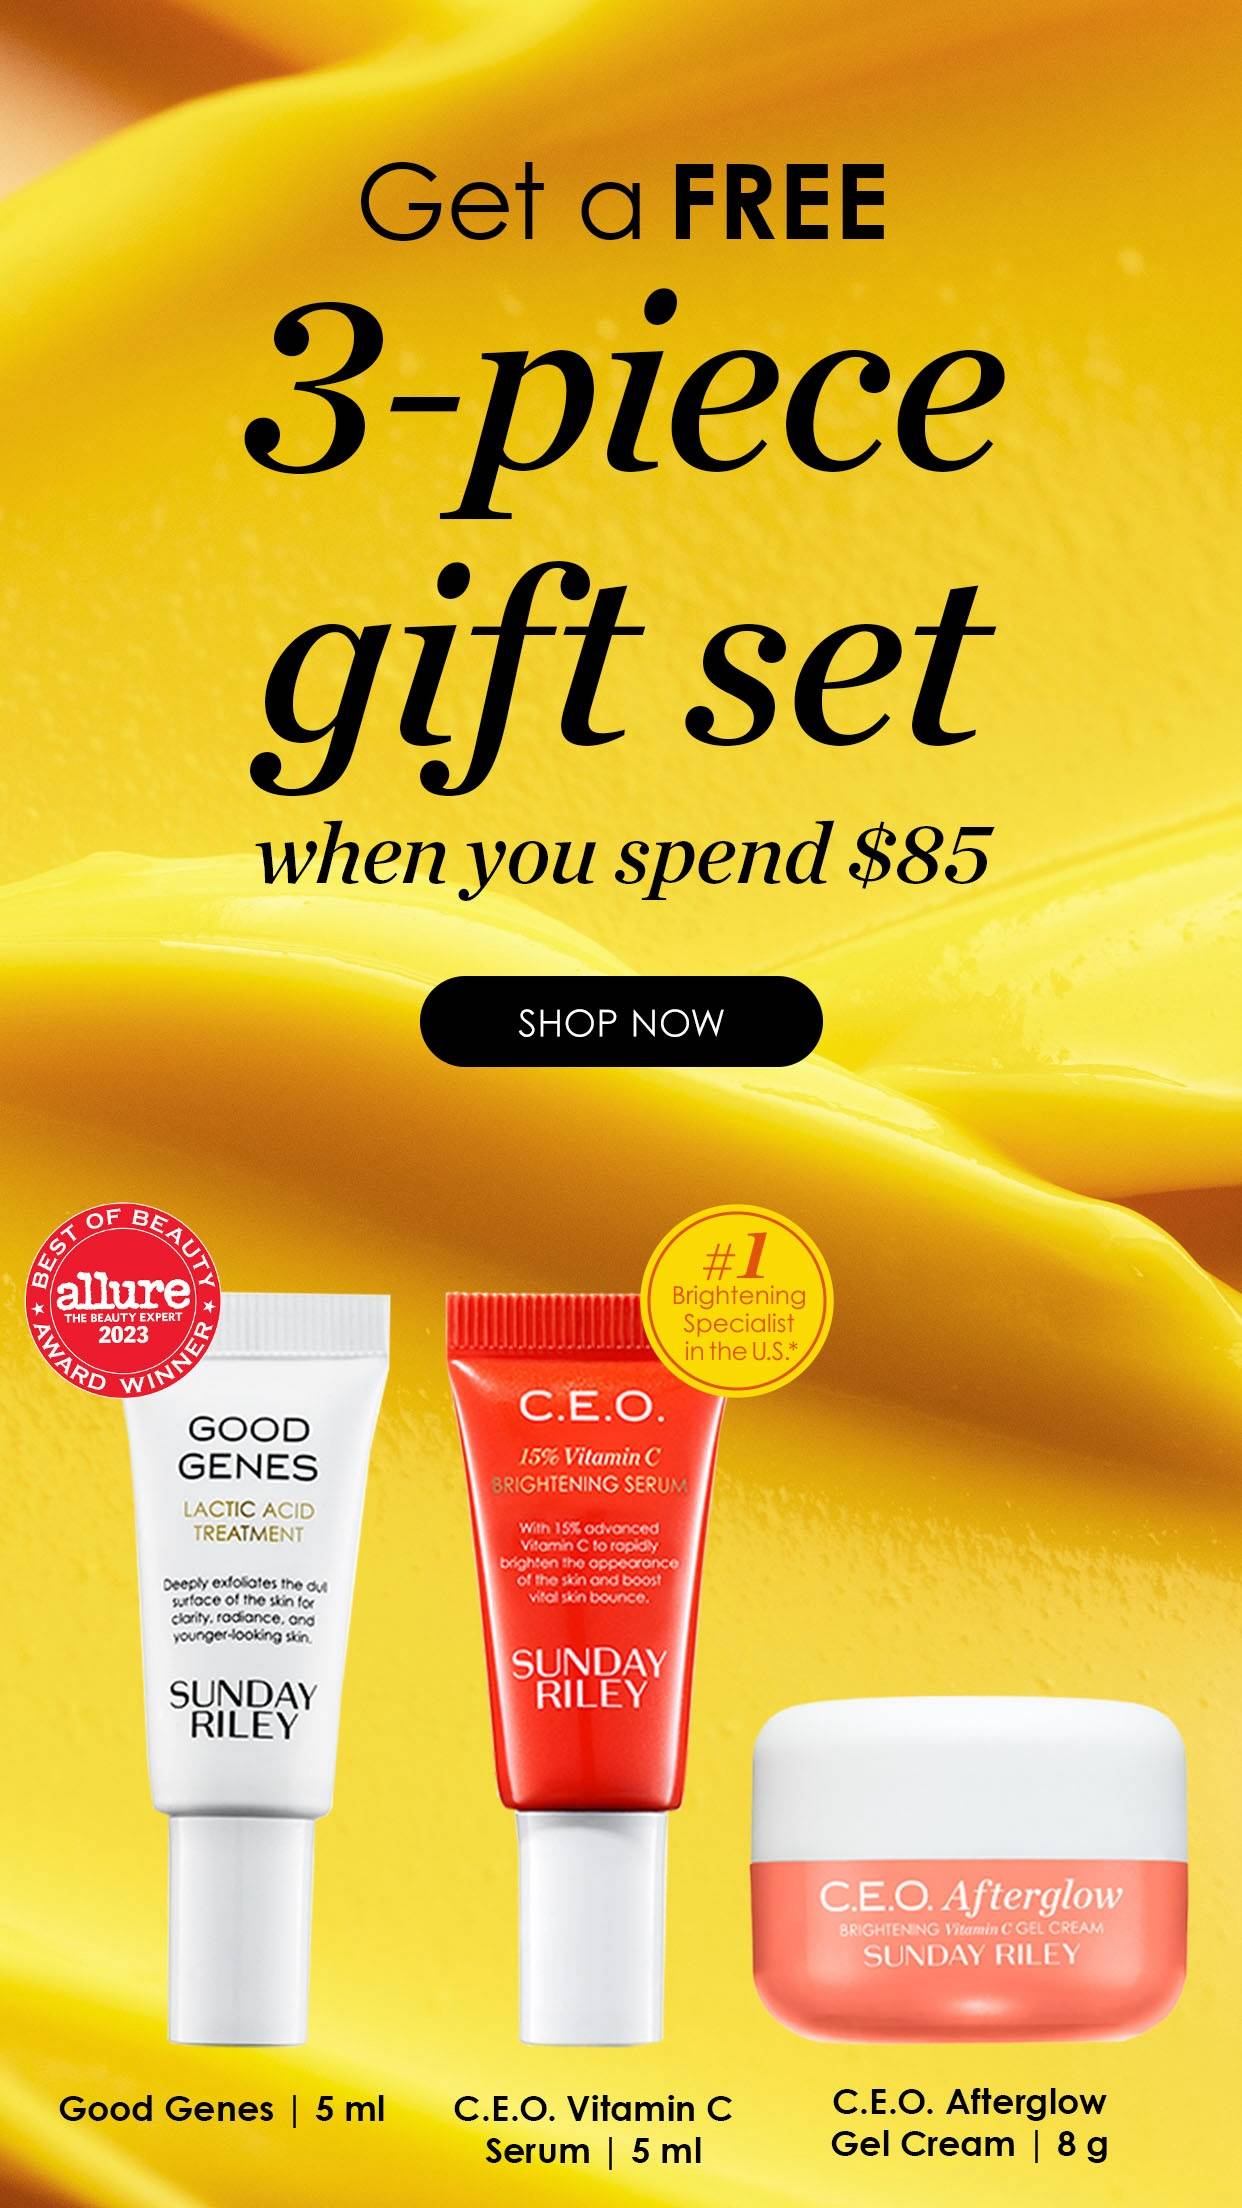 Get a FREE 3-piece gift set when you spend $85